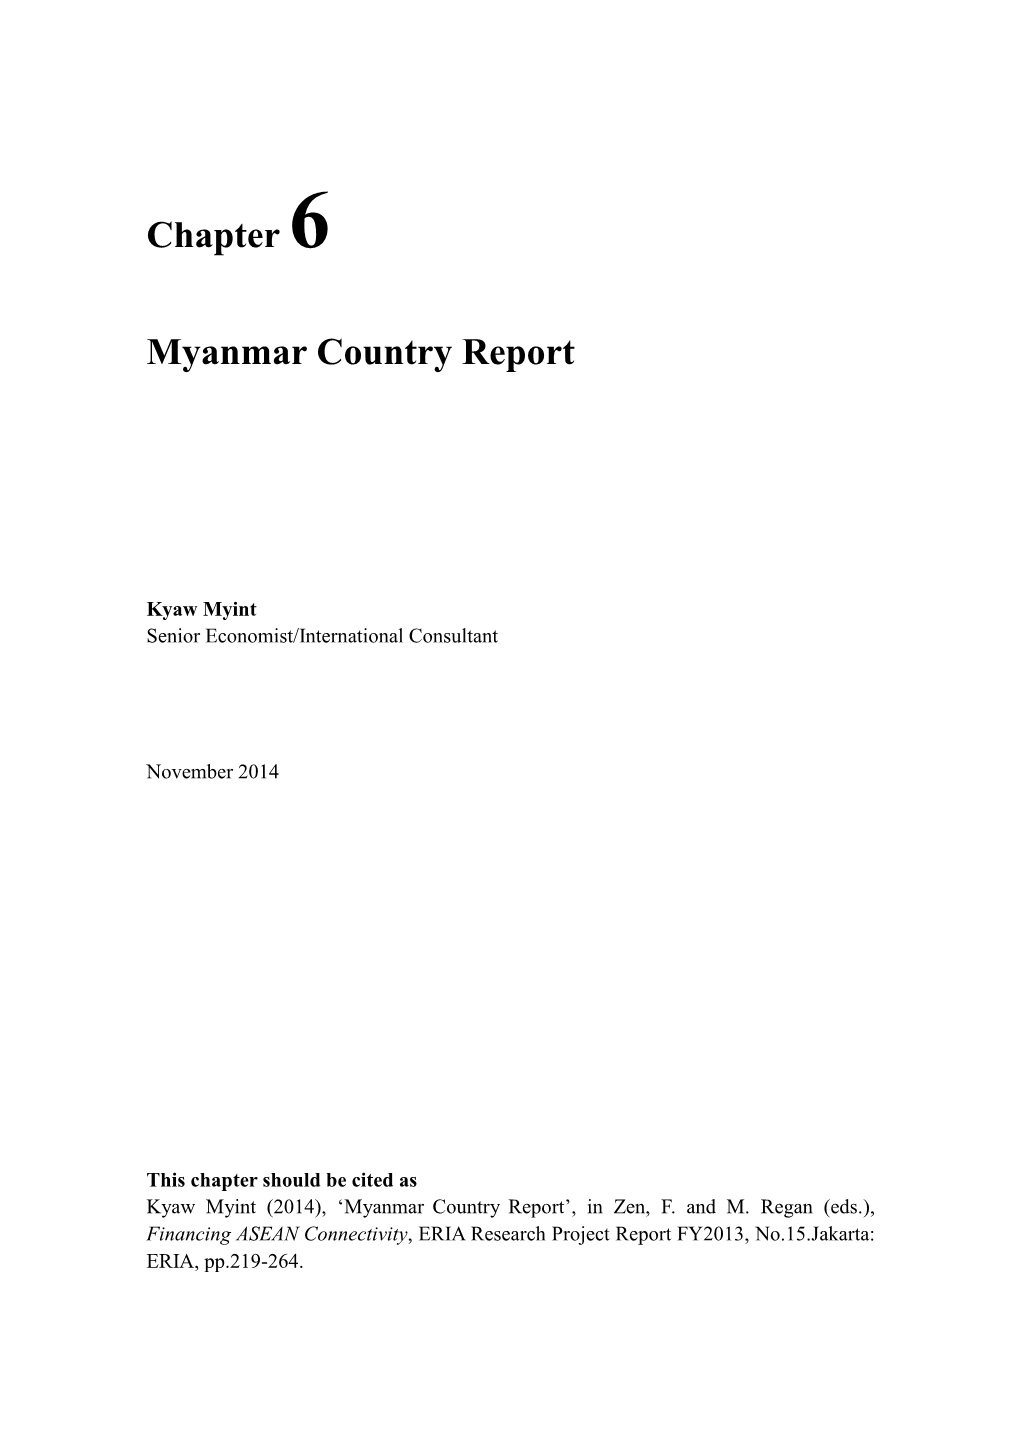 Chapter 6 Myanmar Country Report